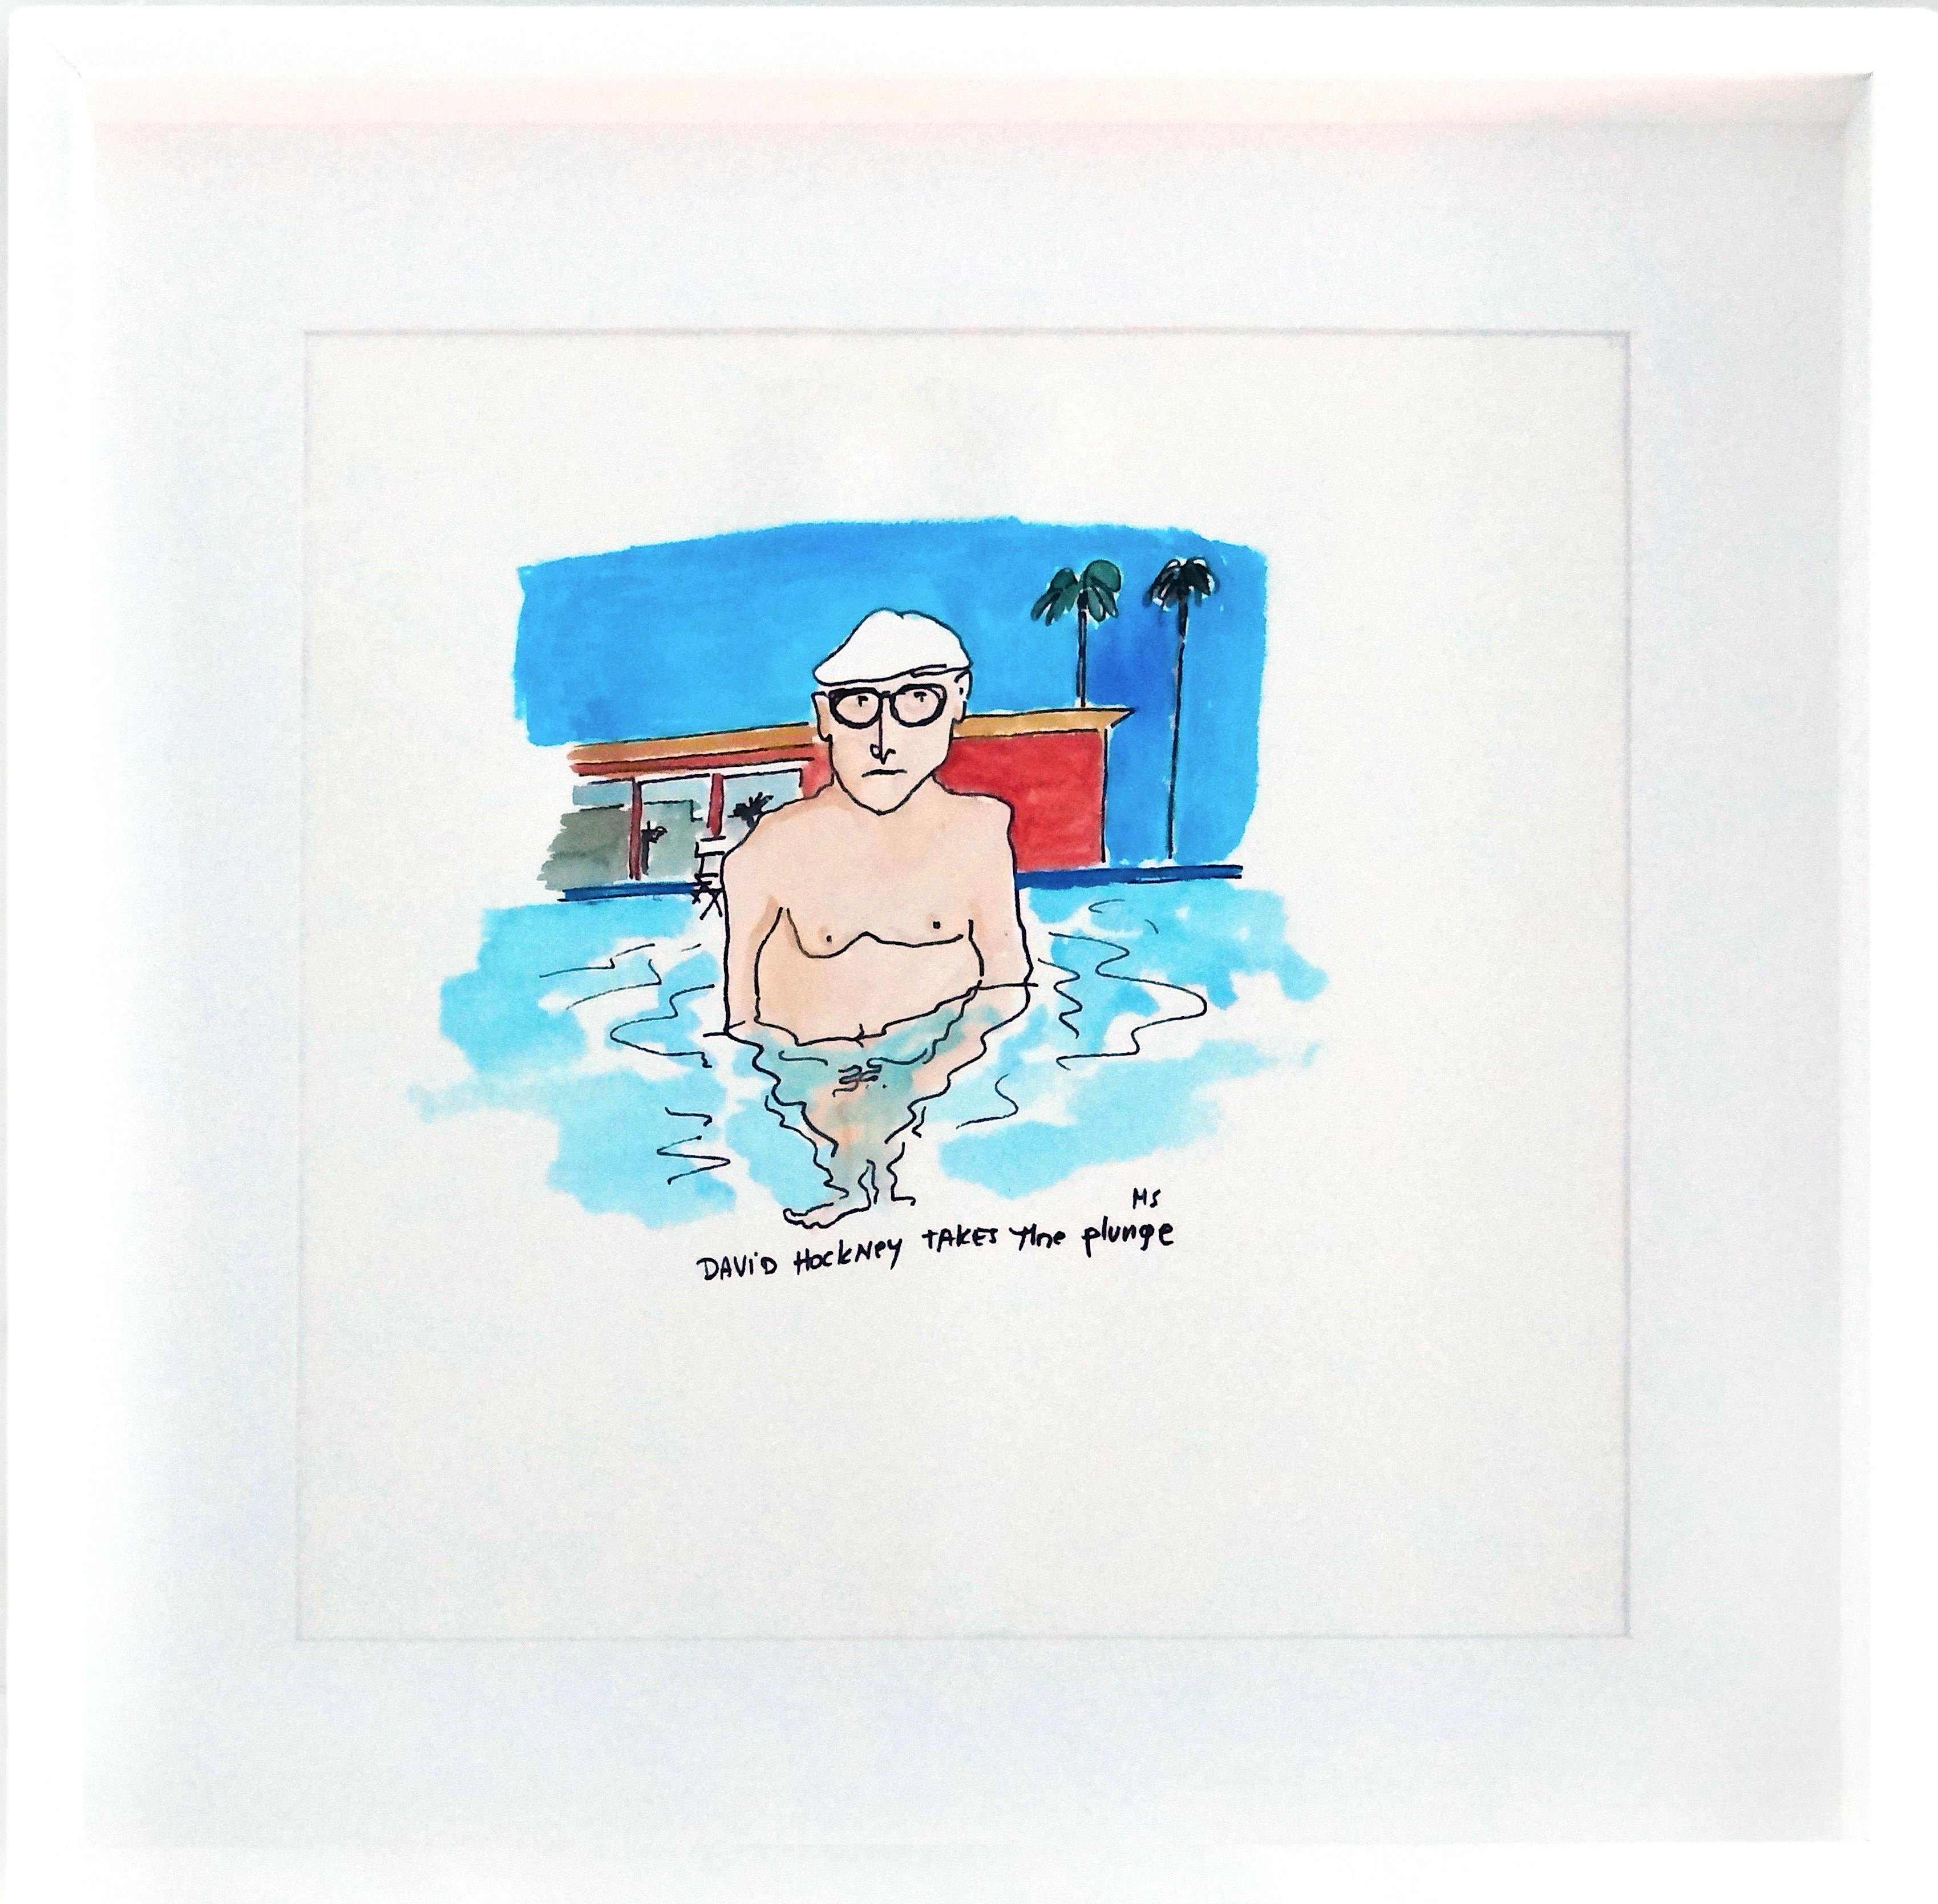 Manuel Santelices Portrait - David Hockney Takes the Plunge - One of a kind watercolor